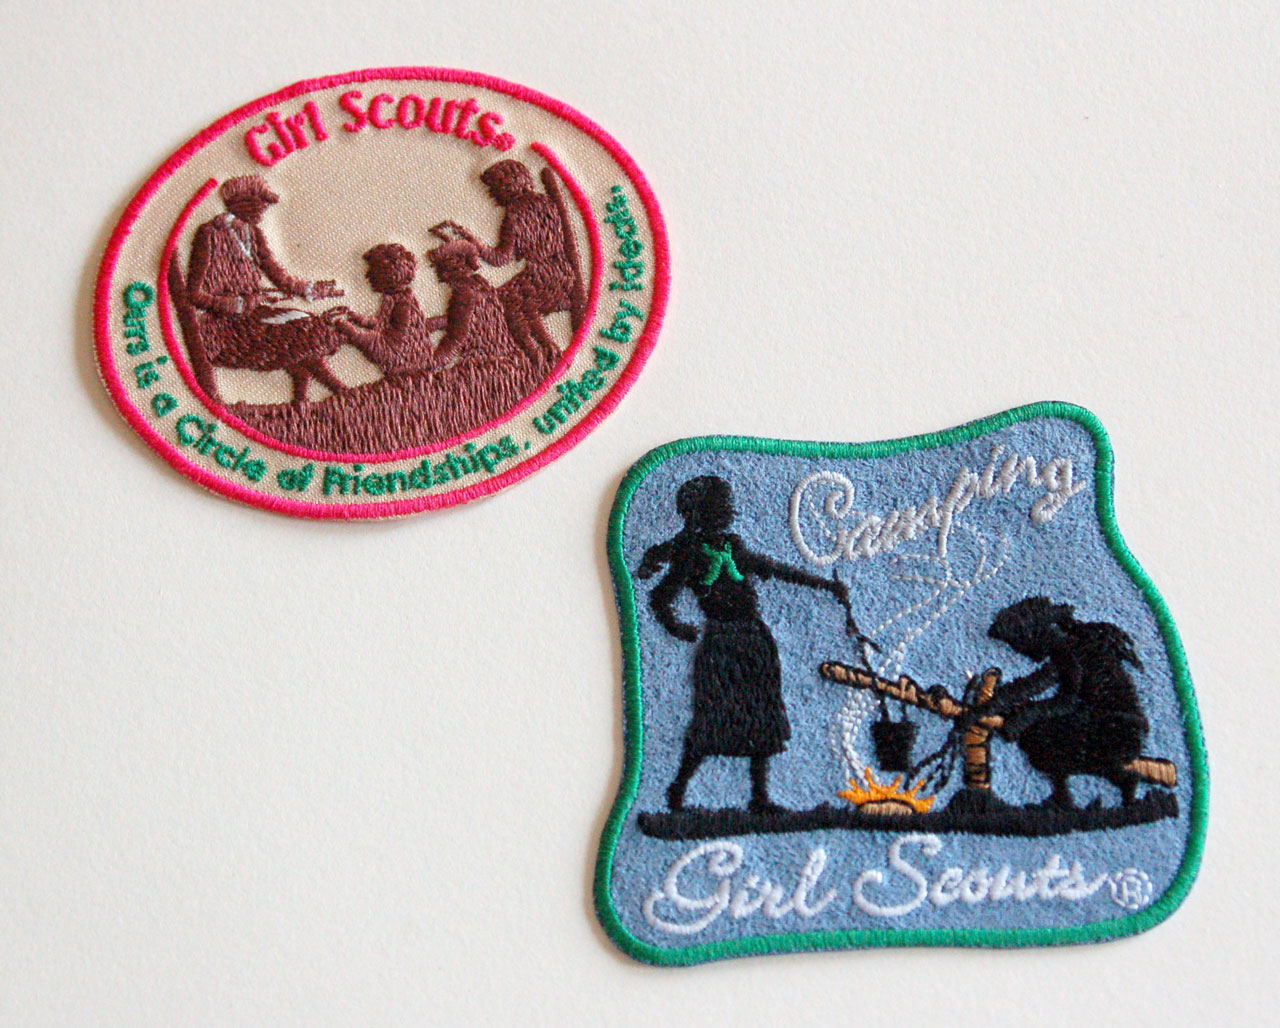 Girl Scout Fun Patches vintage patches